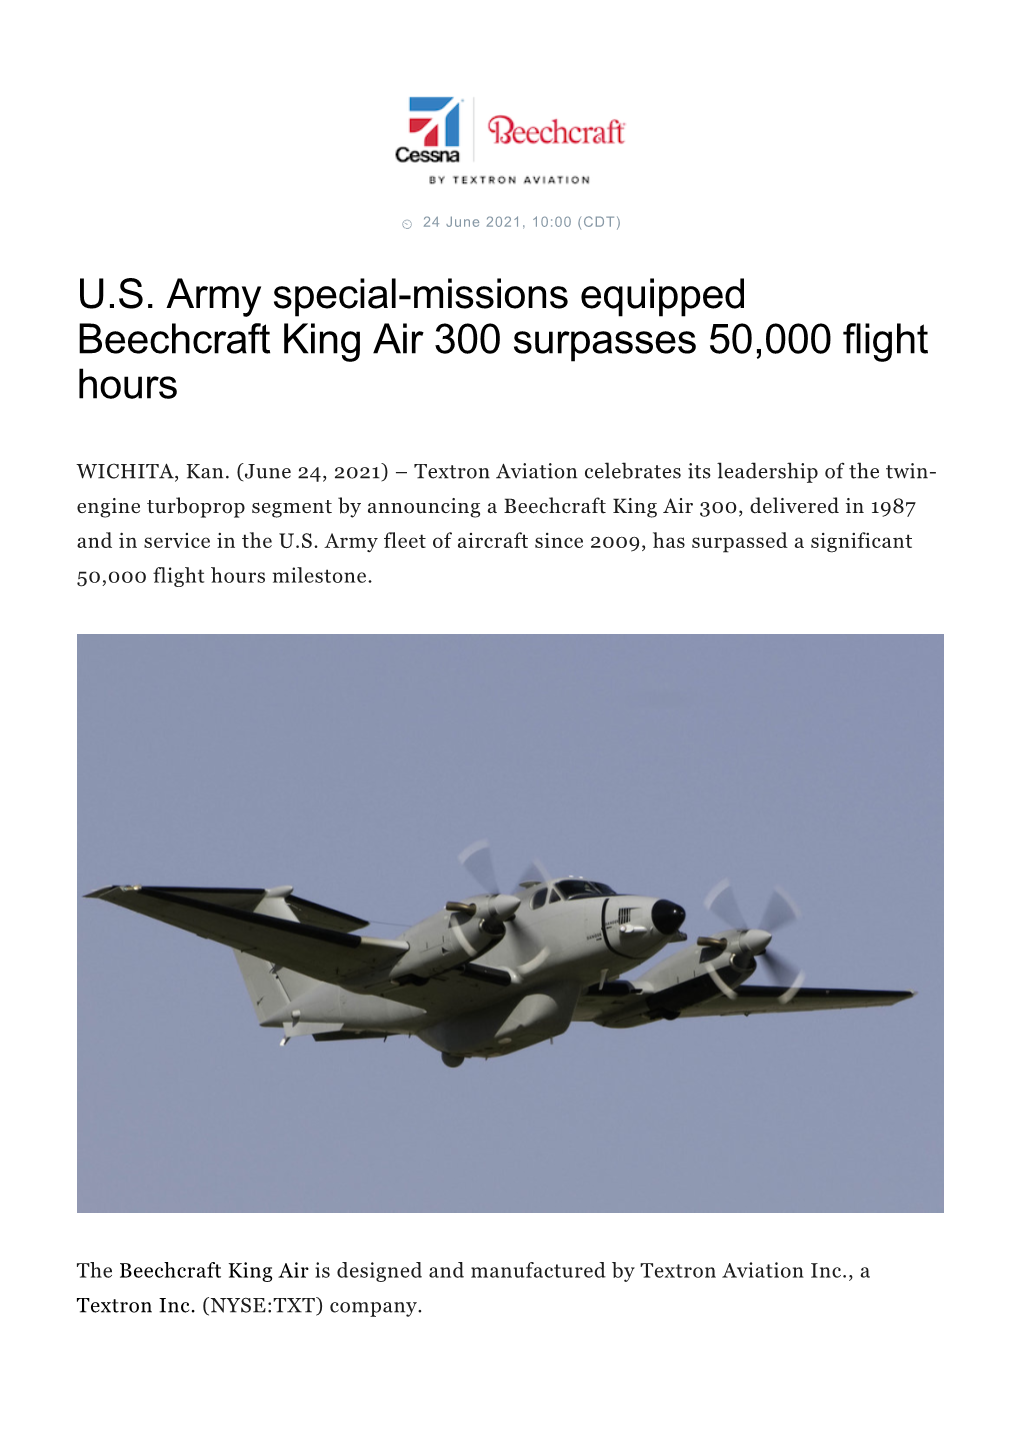 U.S. Army Special-Missions Equipped Beechcraft King Air 300 Surpasses 50,000 Flight Hours